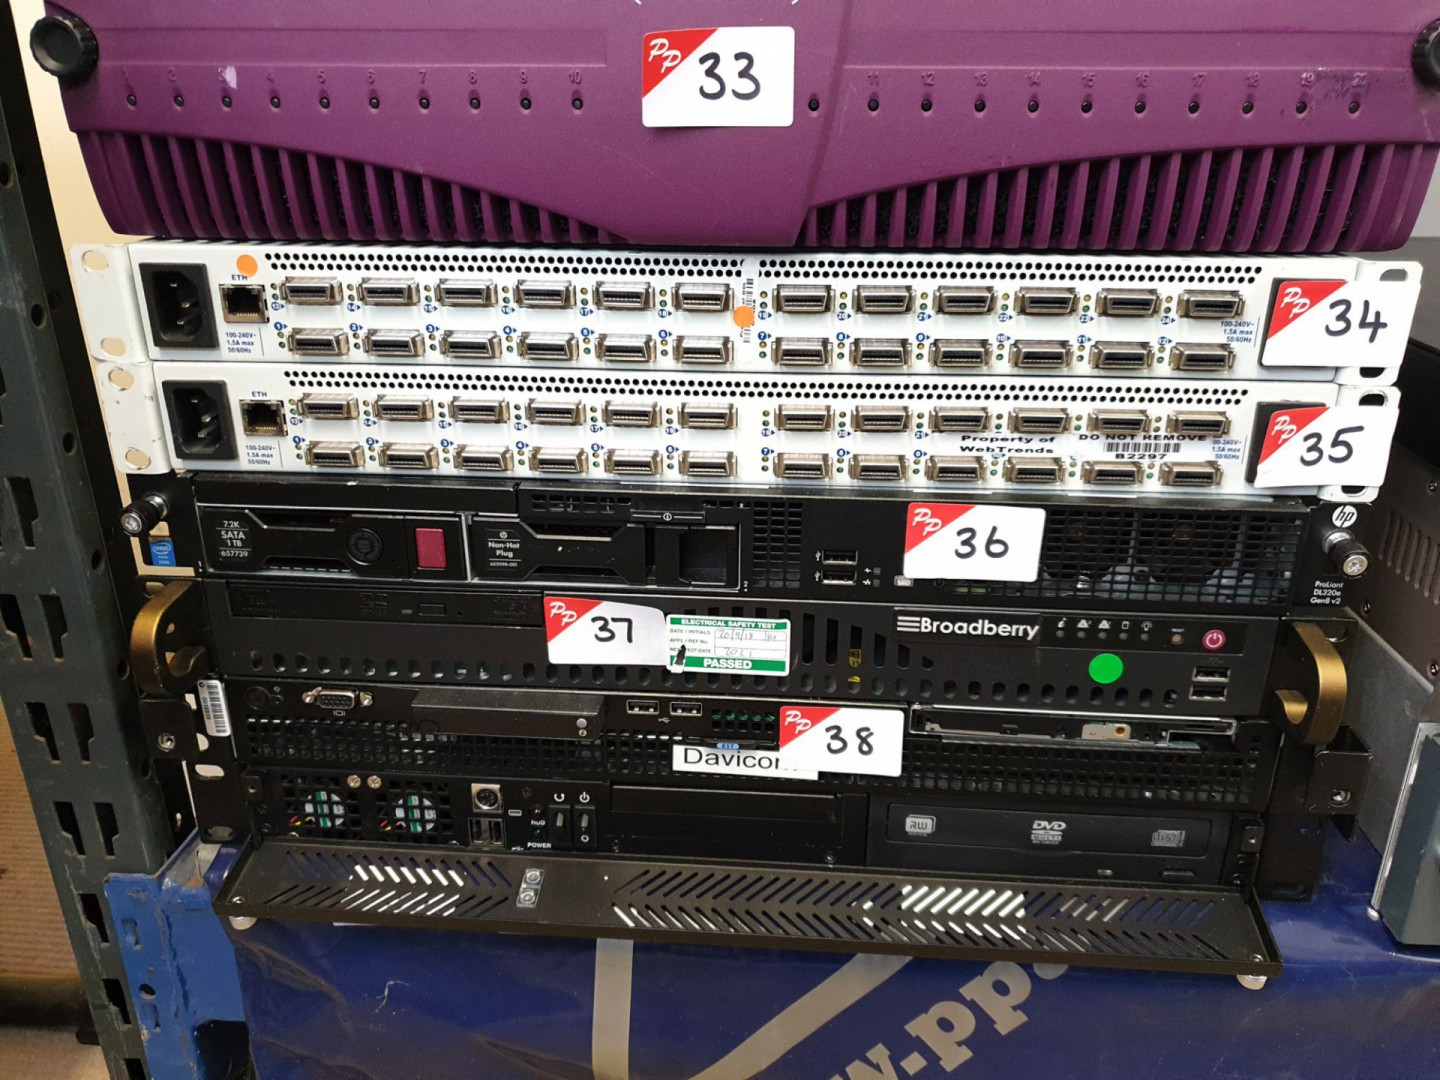 Rack type network router